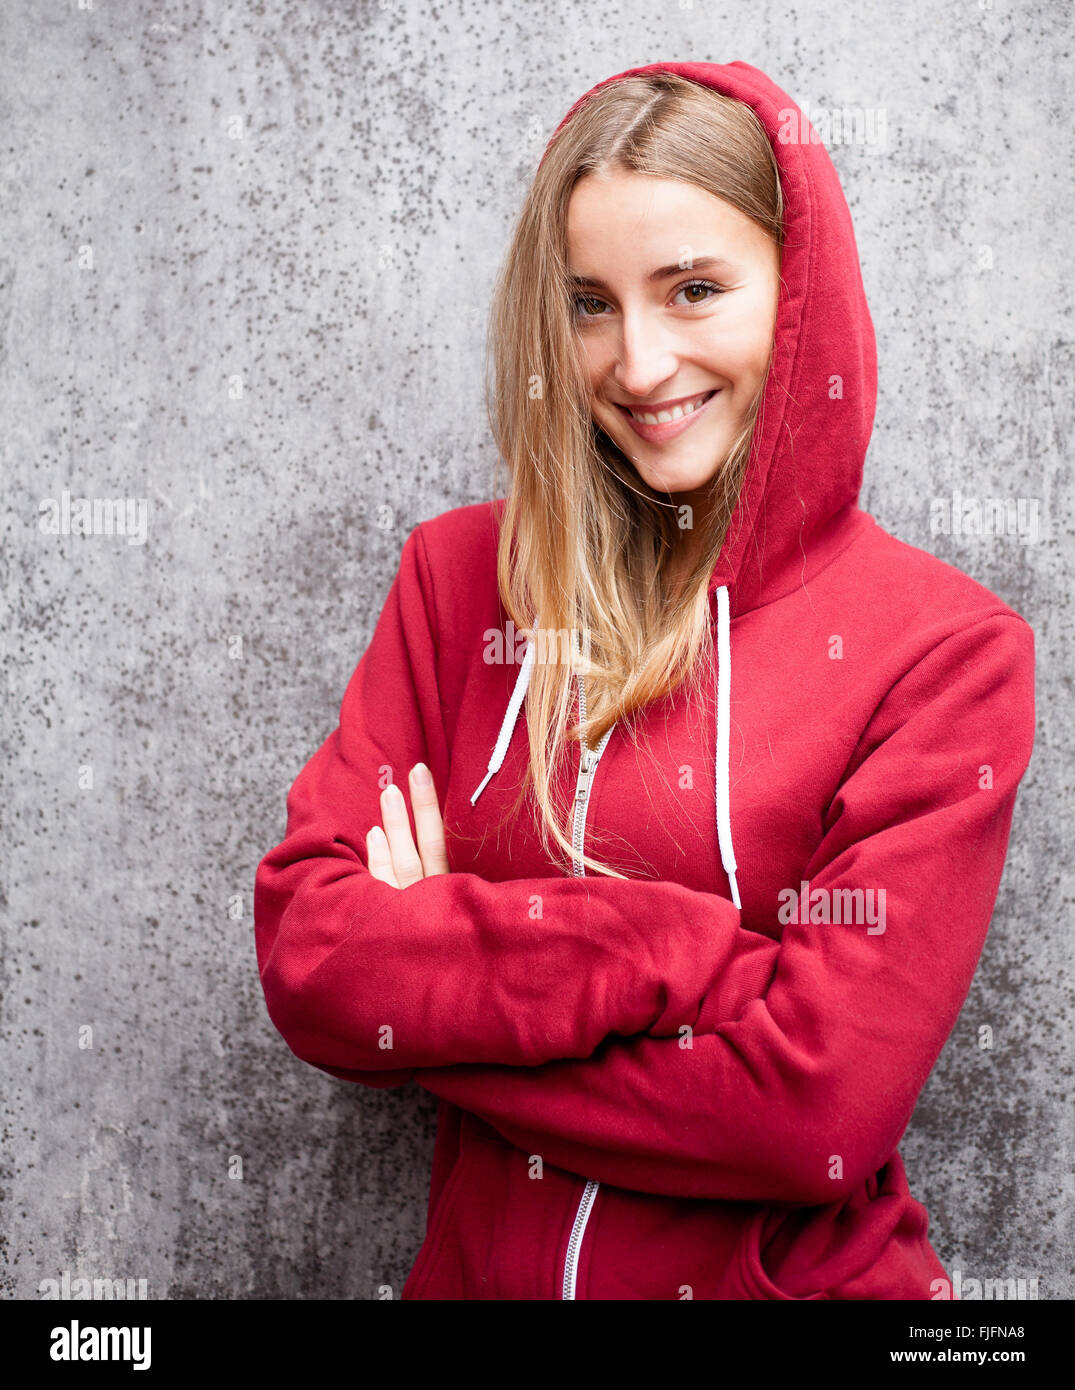 Attractive young woman wearing red hoodie Stock Photo